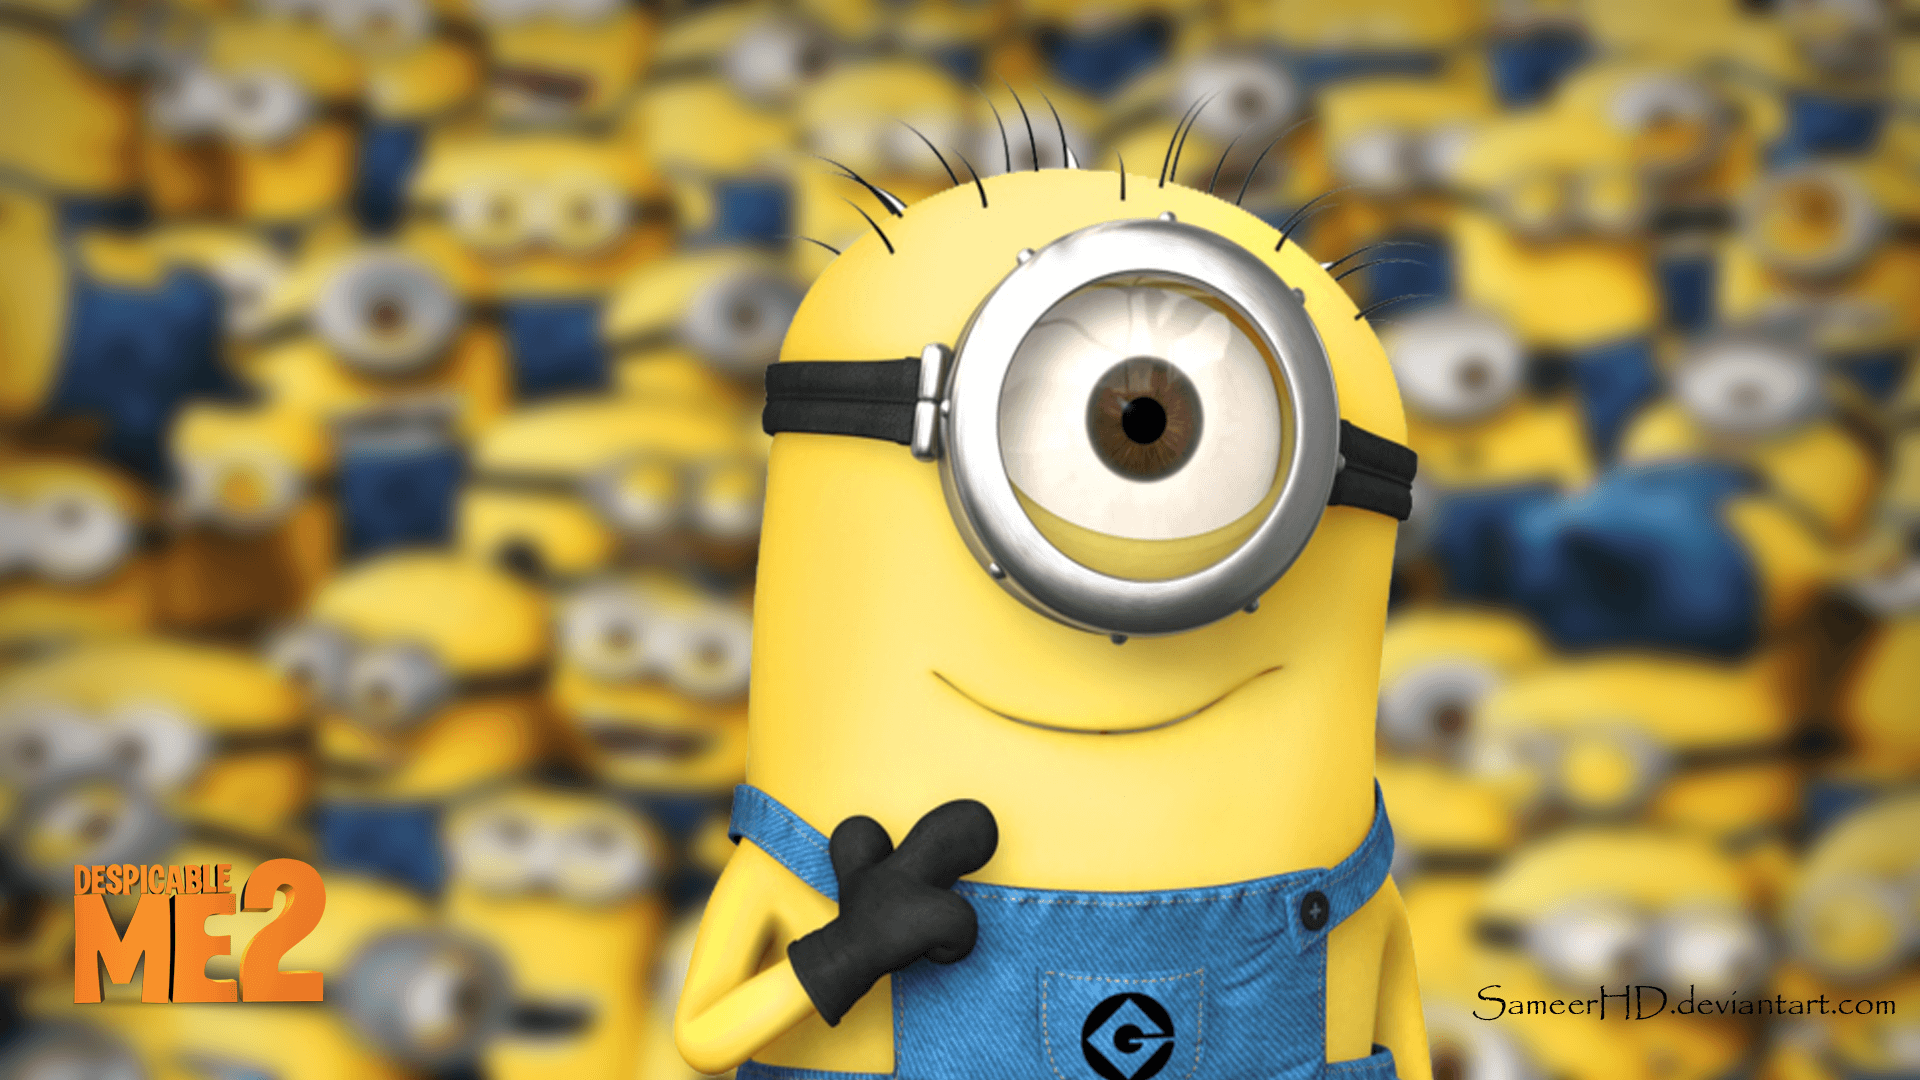 210 Despicable Me 2 HD Wallpapers and Backgrounds